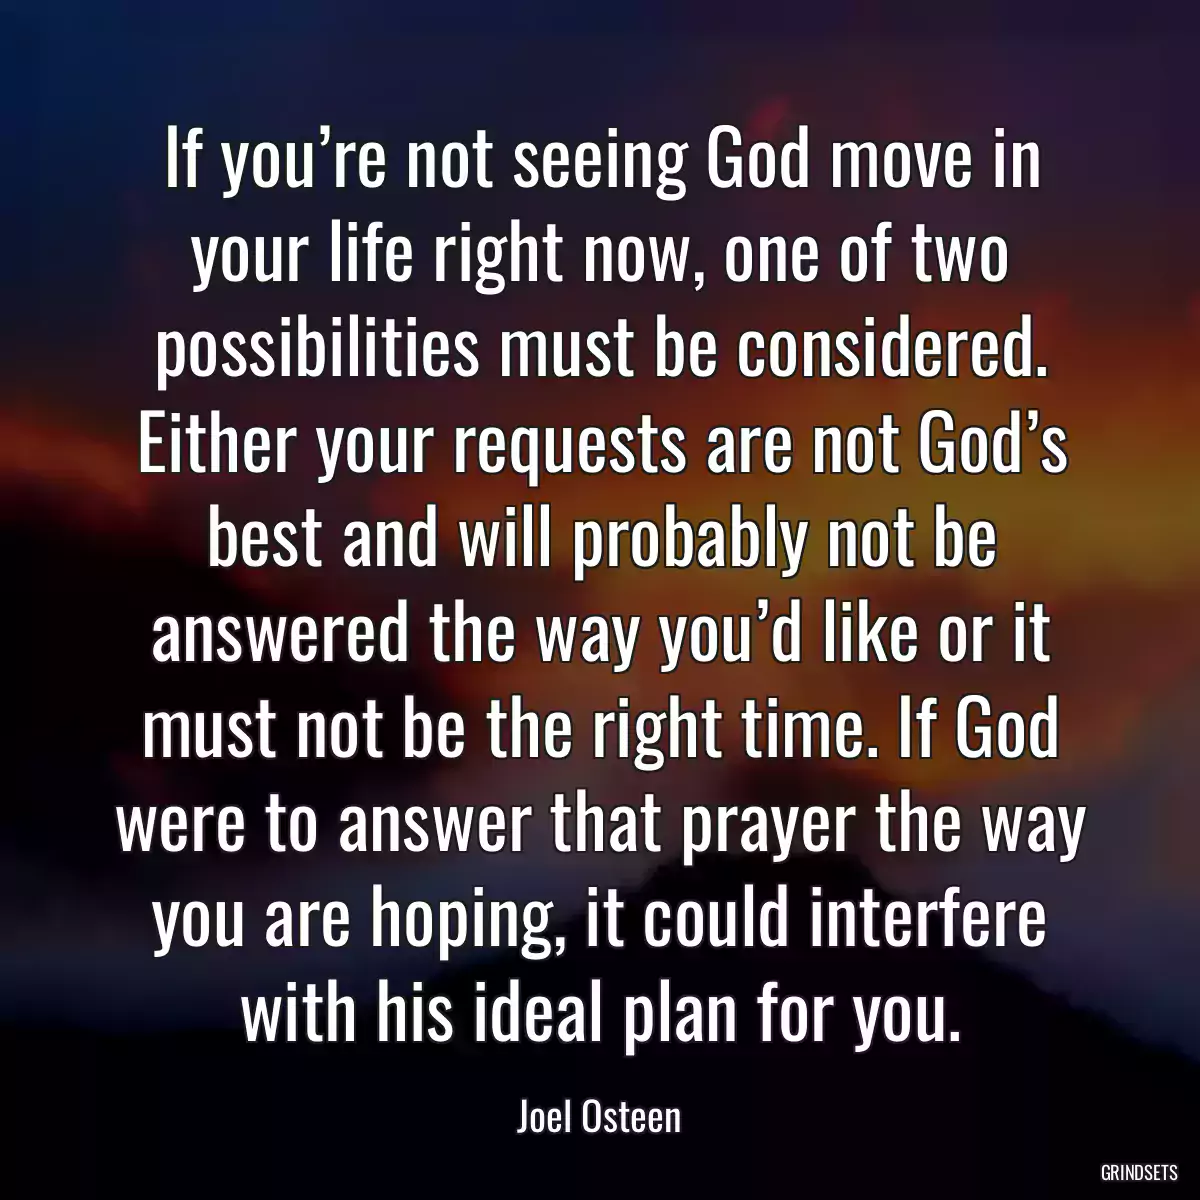 If you’re not seeing God move in your life right now, one of two possibilities must be considered. Either your requests are not God’s best and will probably not be answered the way you’d like or it must not be the right time. If God were to answer that prayer the way you are hoping, it could interfere with his ideal plan for you.